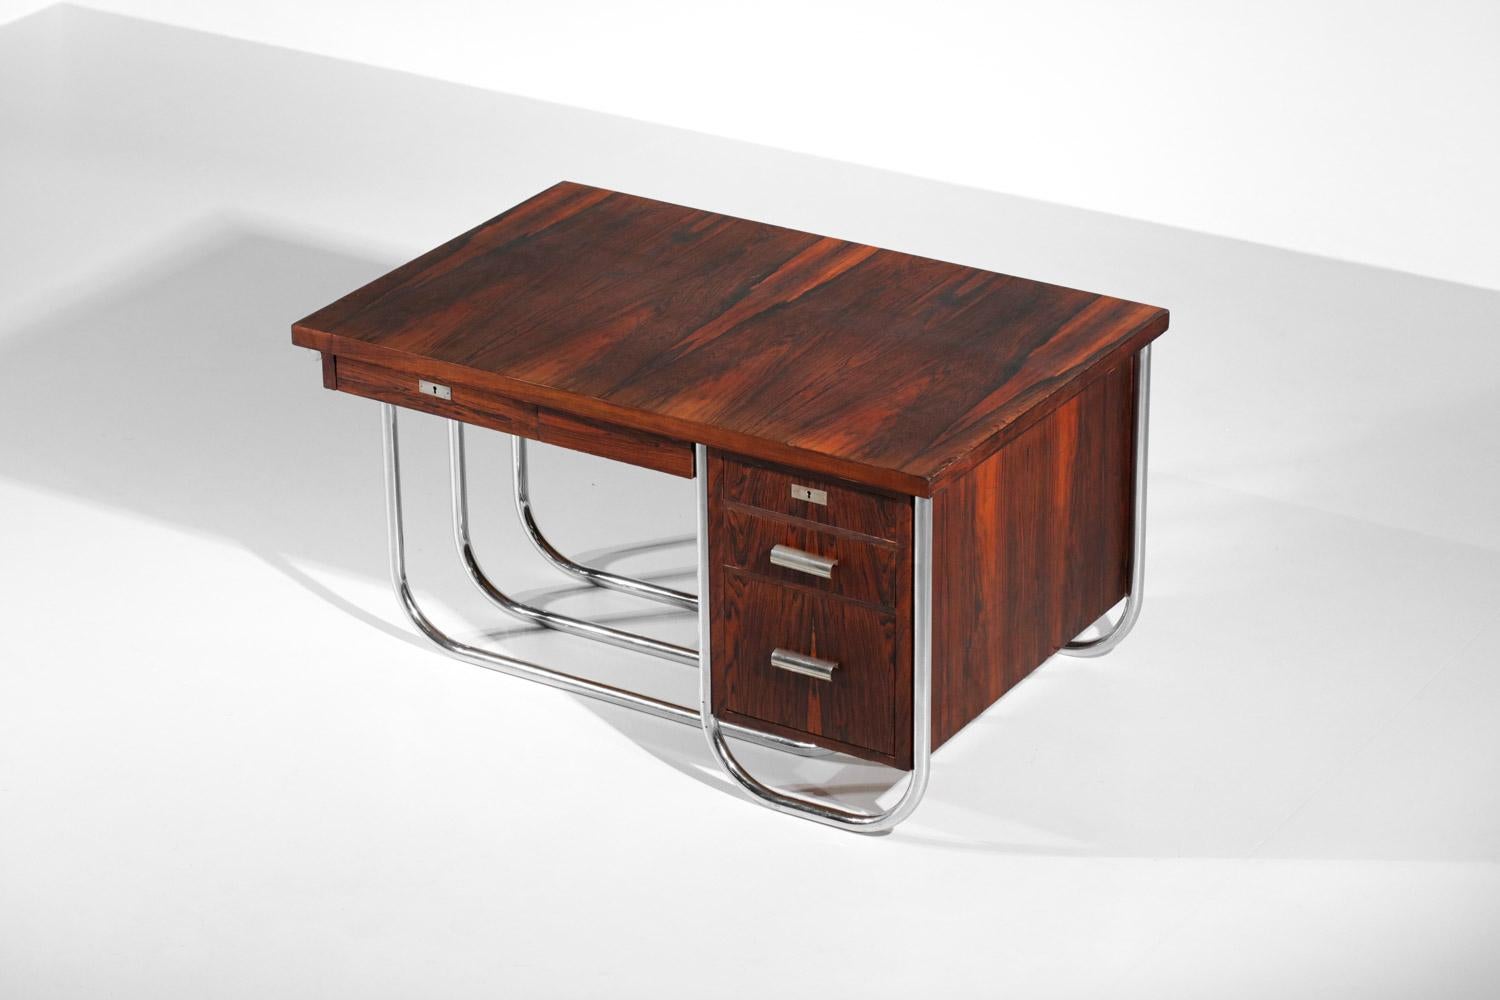 French Modernist Desk in Solid Wood 40s / 50s Bauhaus Style Vintage For Sale